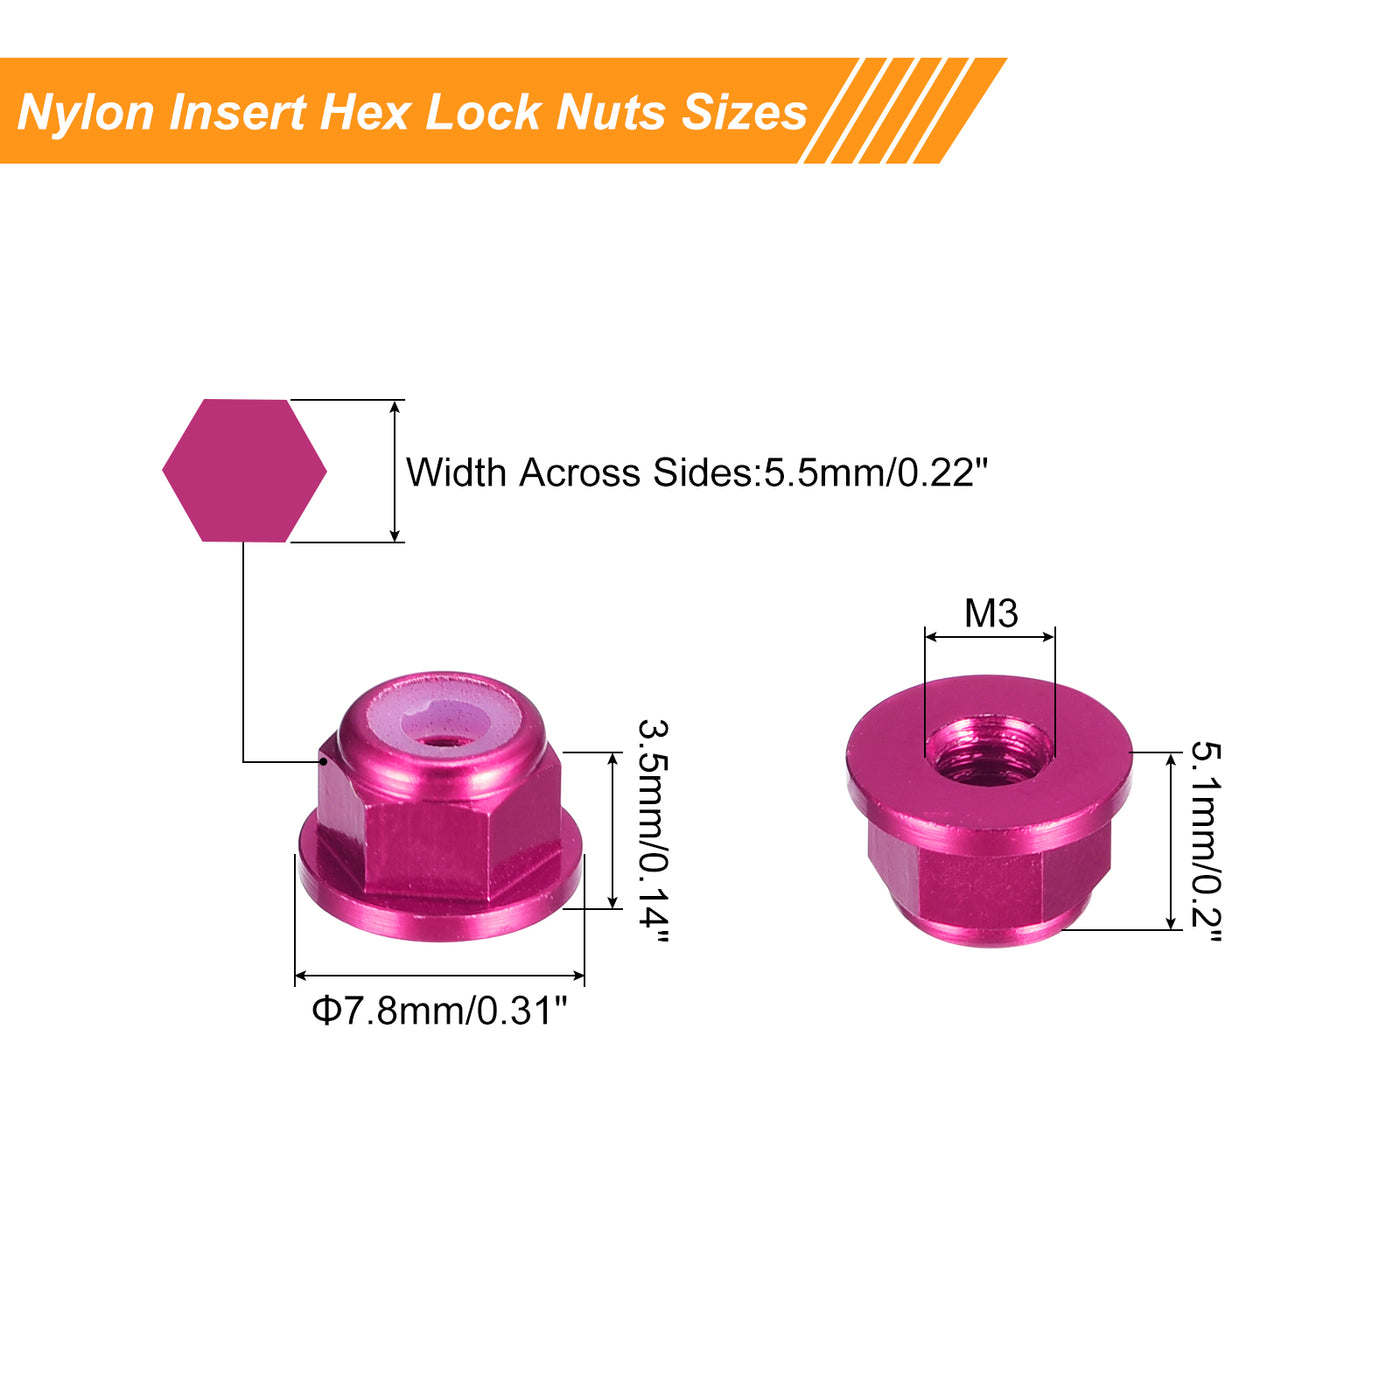 uxcell Uxcell Nylon Insert Hex Lock Nuts, 4pcs - M3 x 0.5mm Aluminum Alloy Self-Locking Nut, Anodizing Flange Lock Nut for Fasteners (Pink)